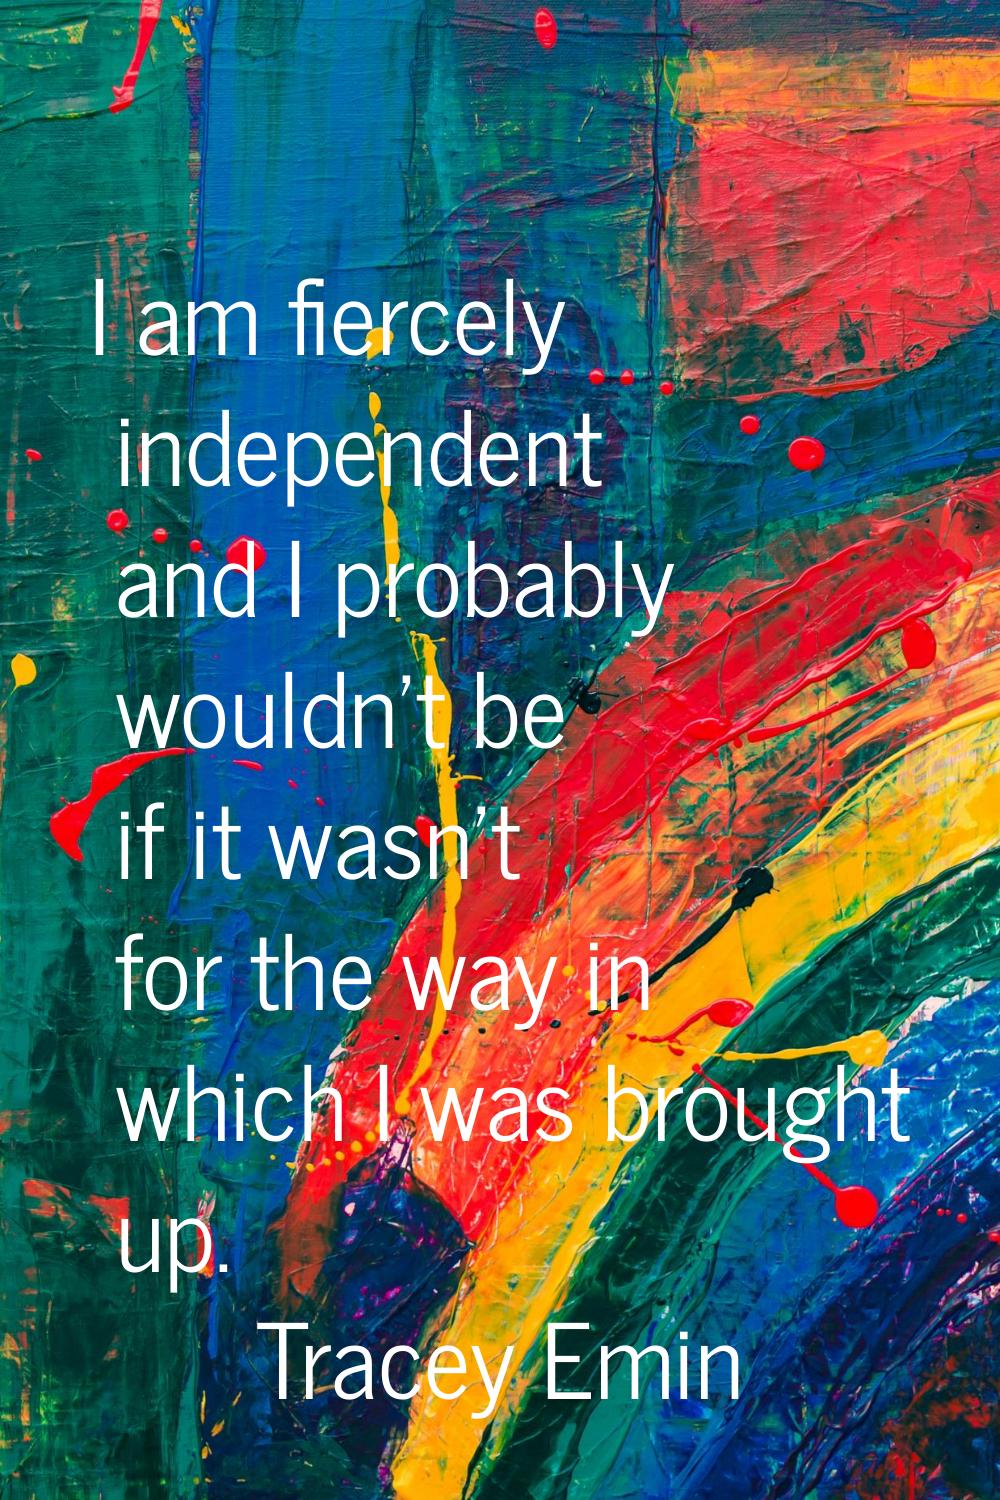 I am fiercely independent and I probably wouldn't be if it wasn't for the way in which I was brough